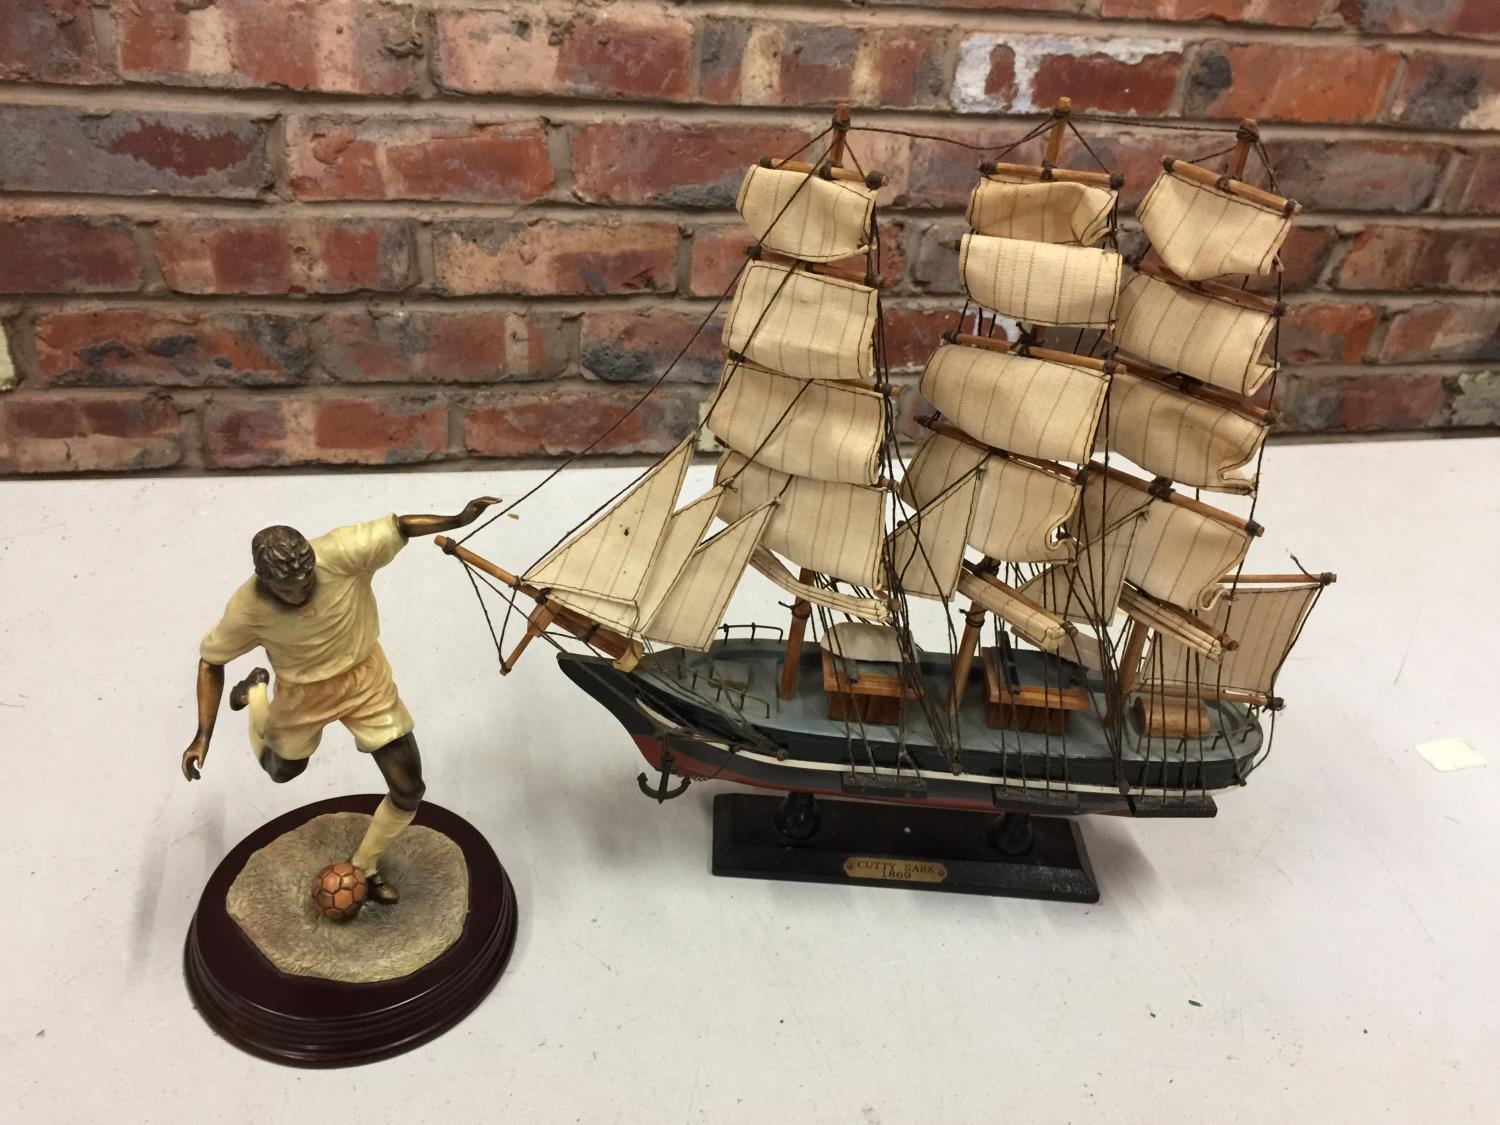 A HAND BUILT MODEL OF THE CUTTY SARK SAILING SHIP AND A FOOTBALLER FIGURINE